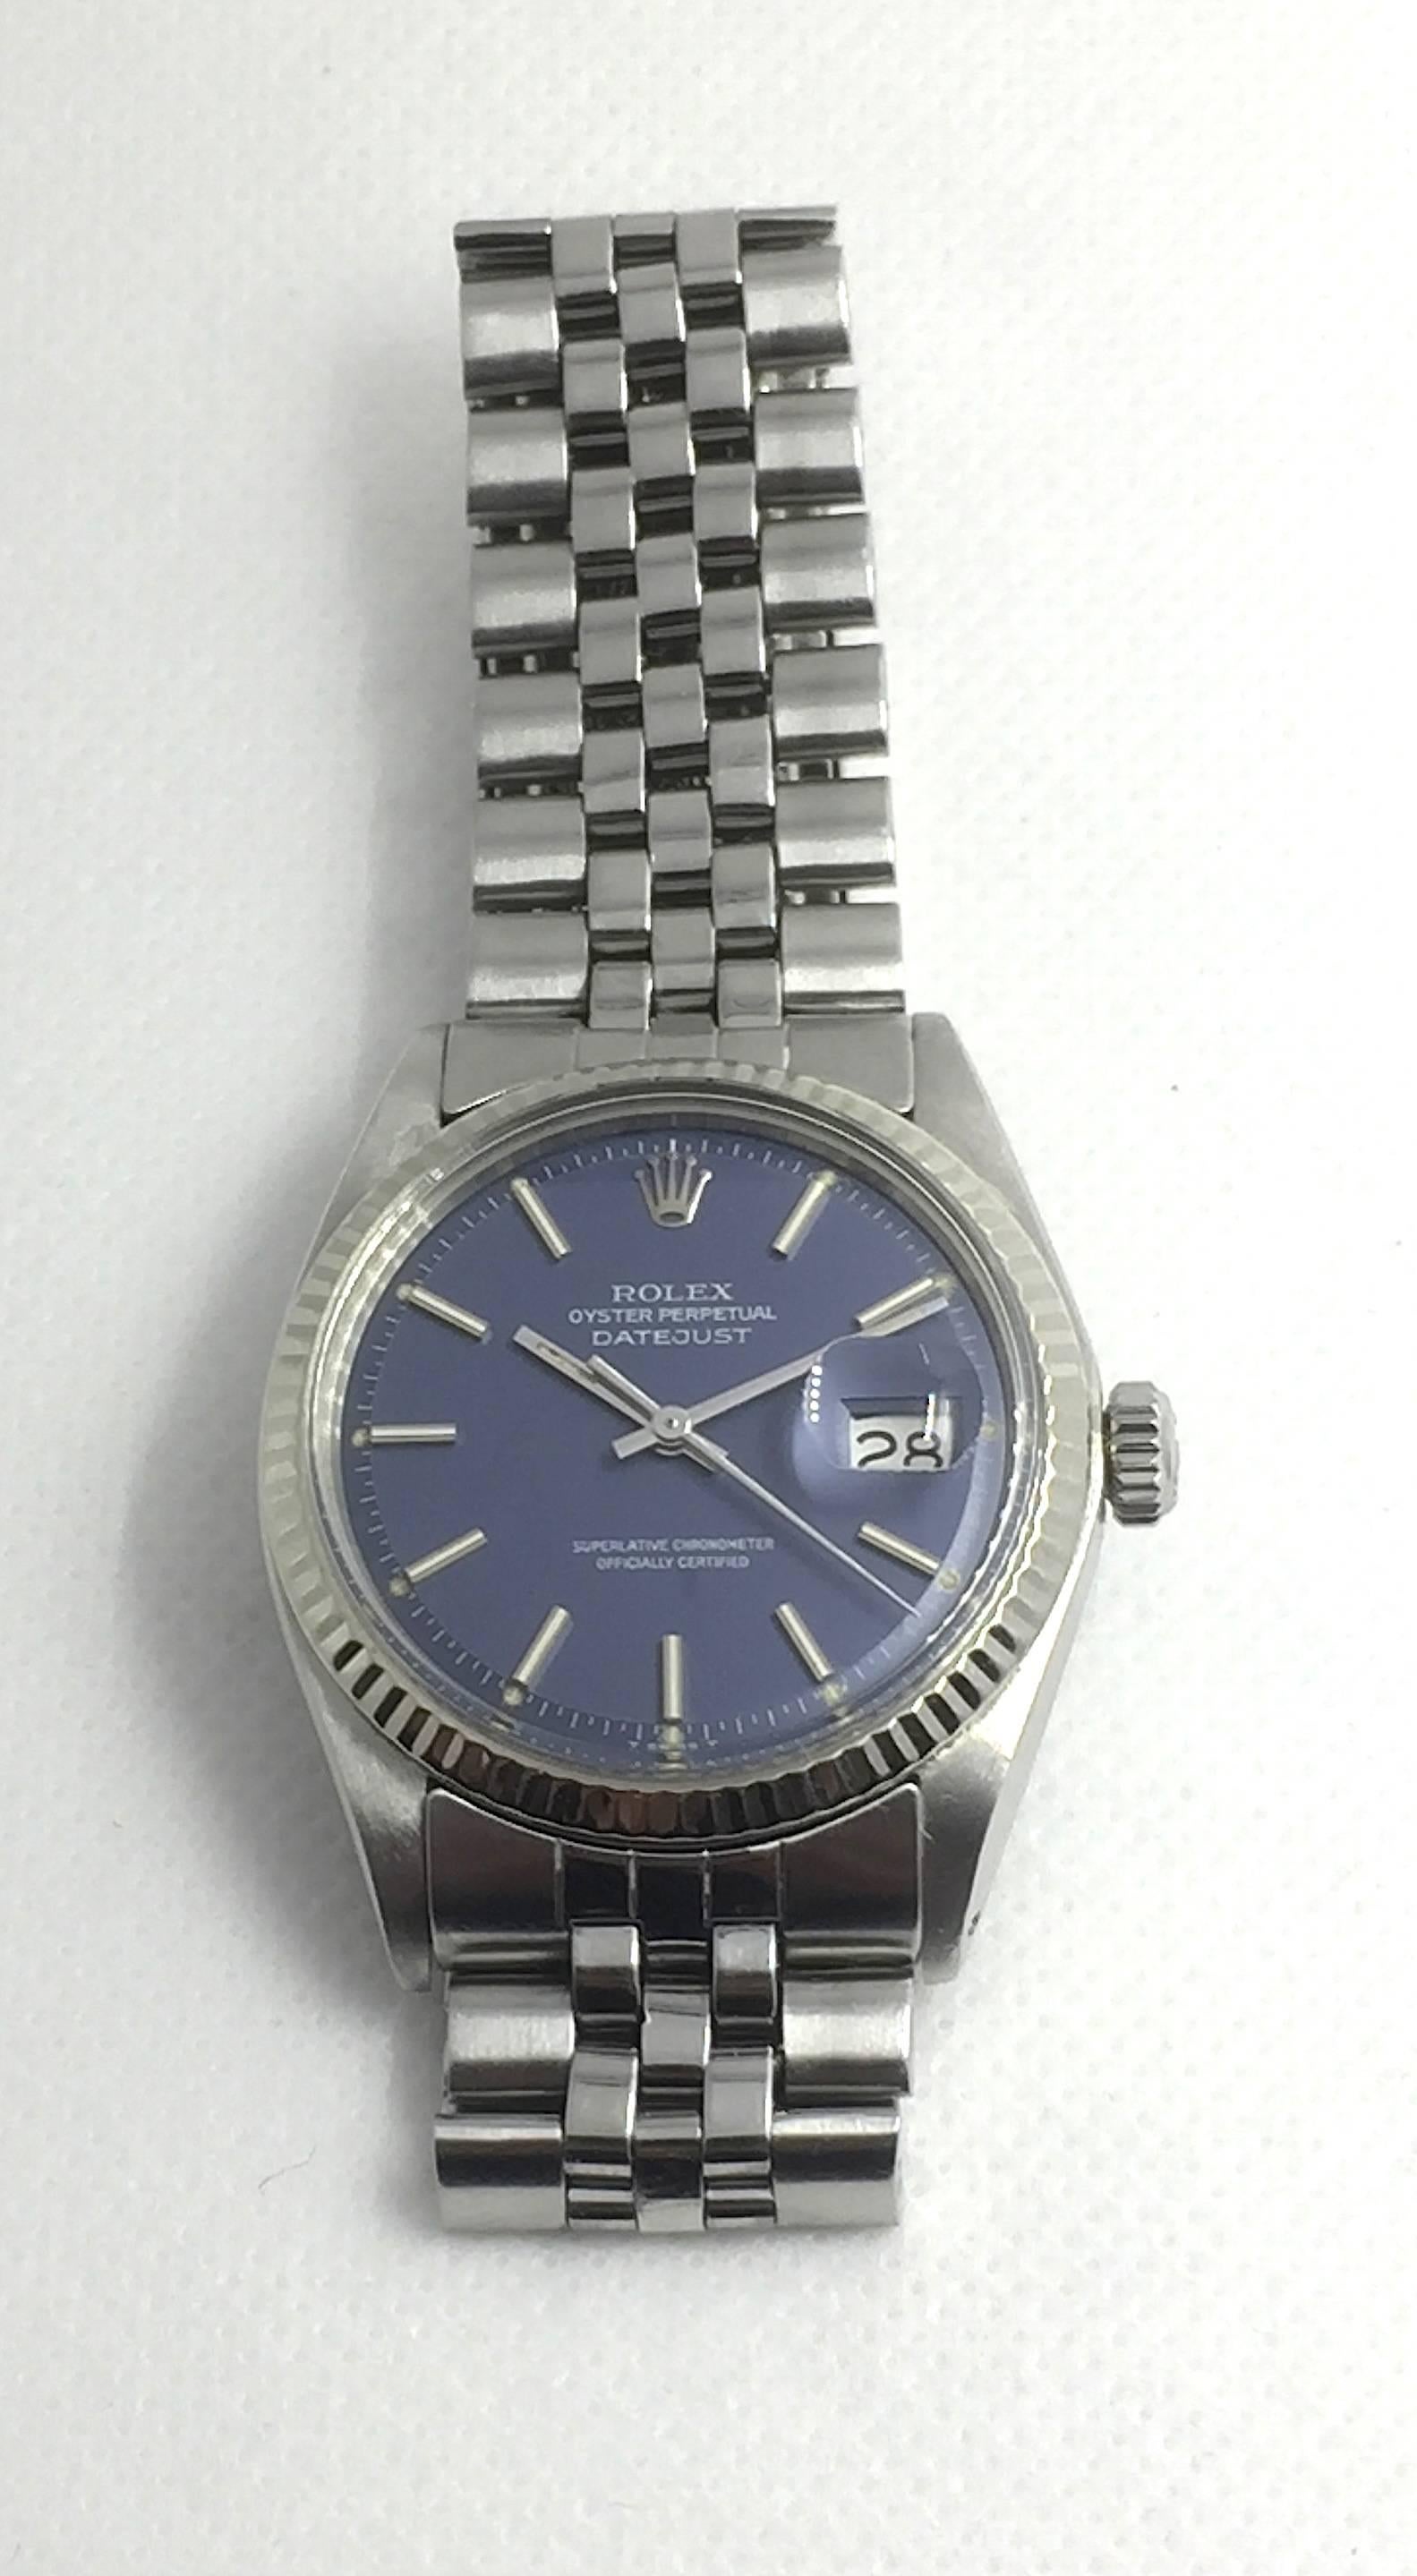 Rolex Stainless Steel Oyster Perpetual Datejust Wristwatch
Factory Blue Matte Dial with Silver Applied Hour Markers
White Gold Fluted Bezel
36mm in size 
Rolex Calibre Base 1500 Automatic Movement
Acrylic Crystal
Early 1970s Production
Comes Fitted